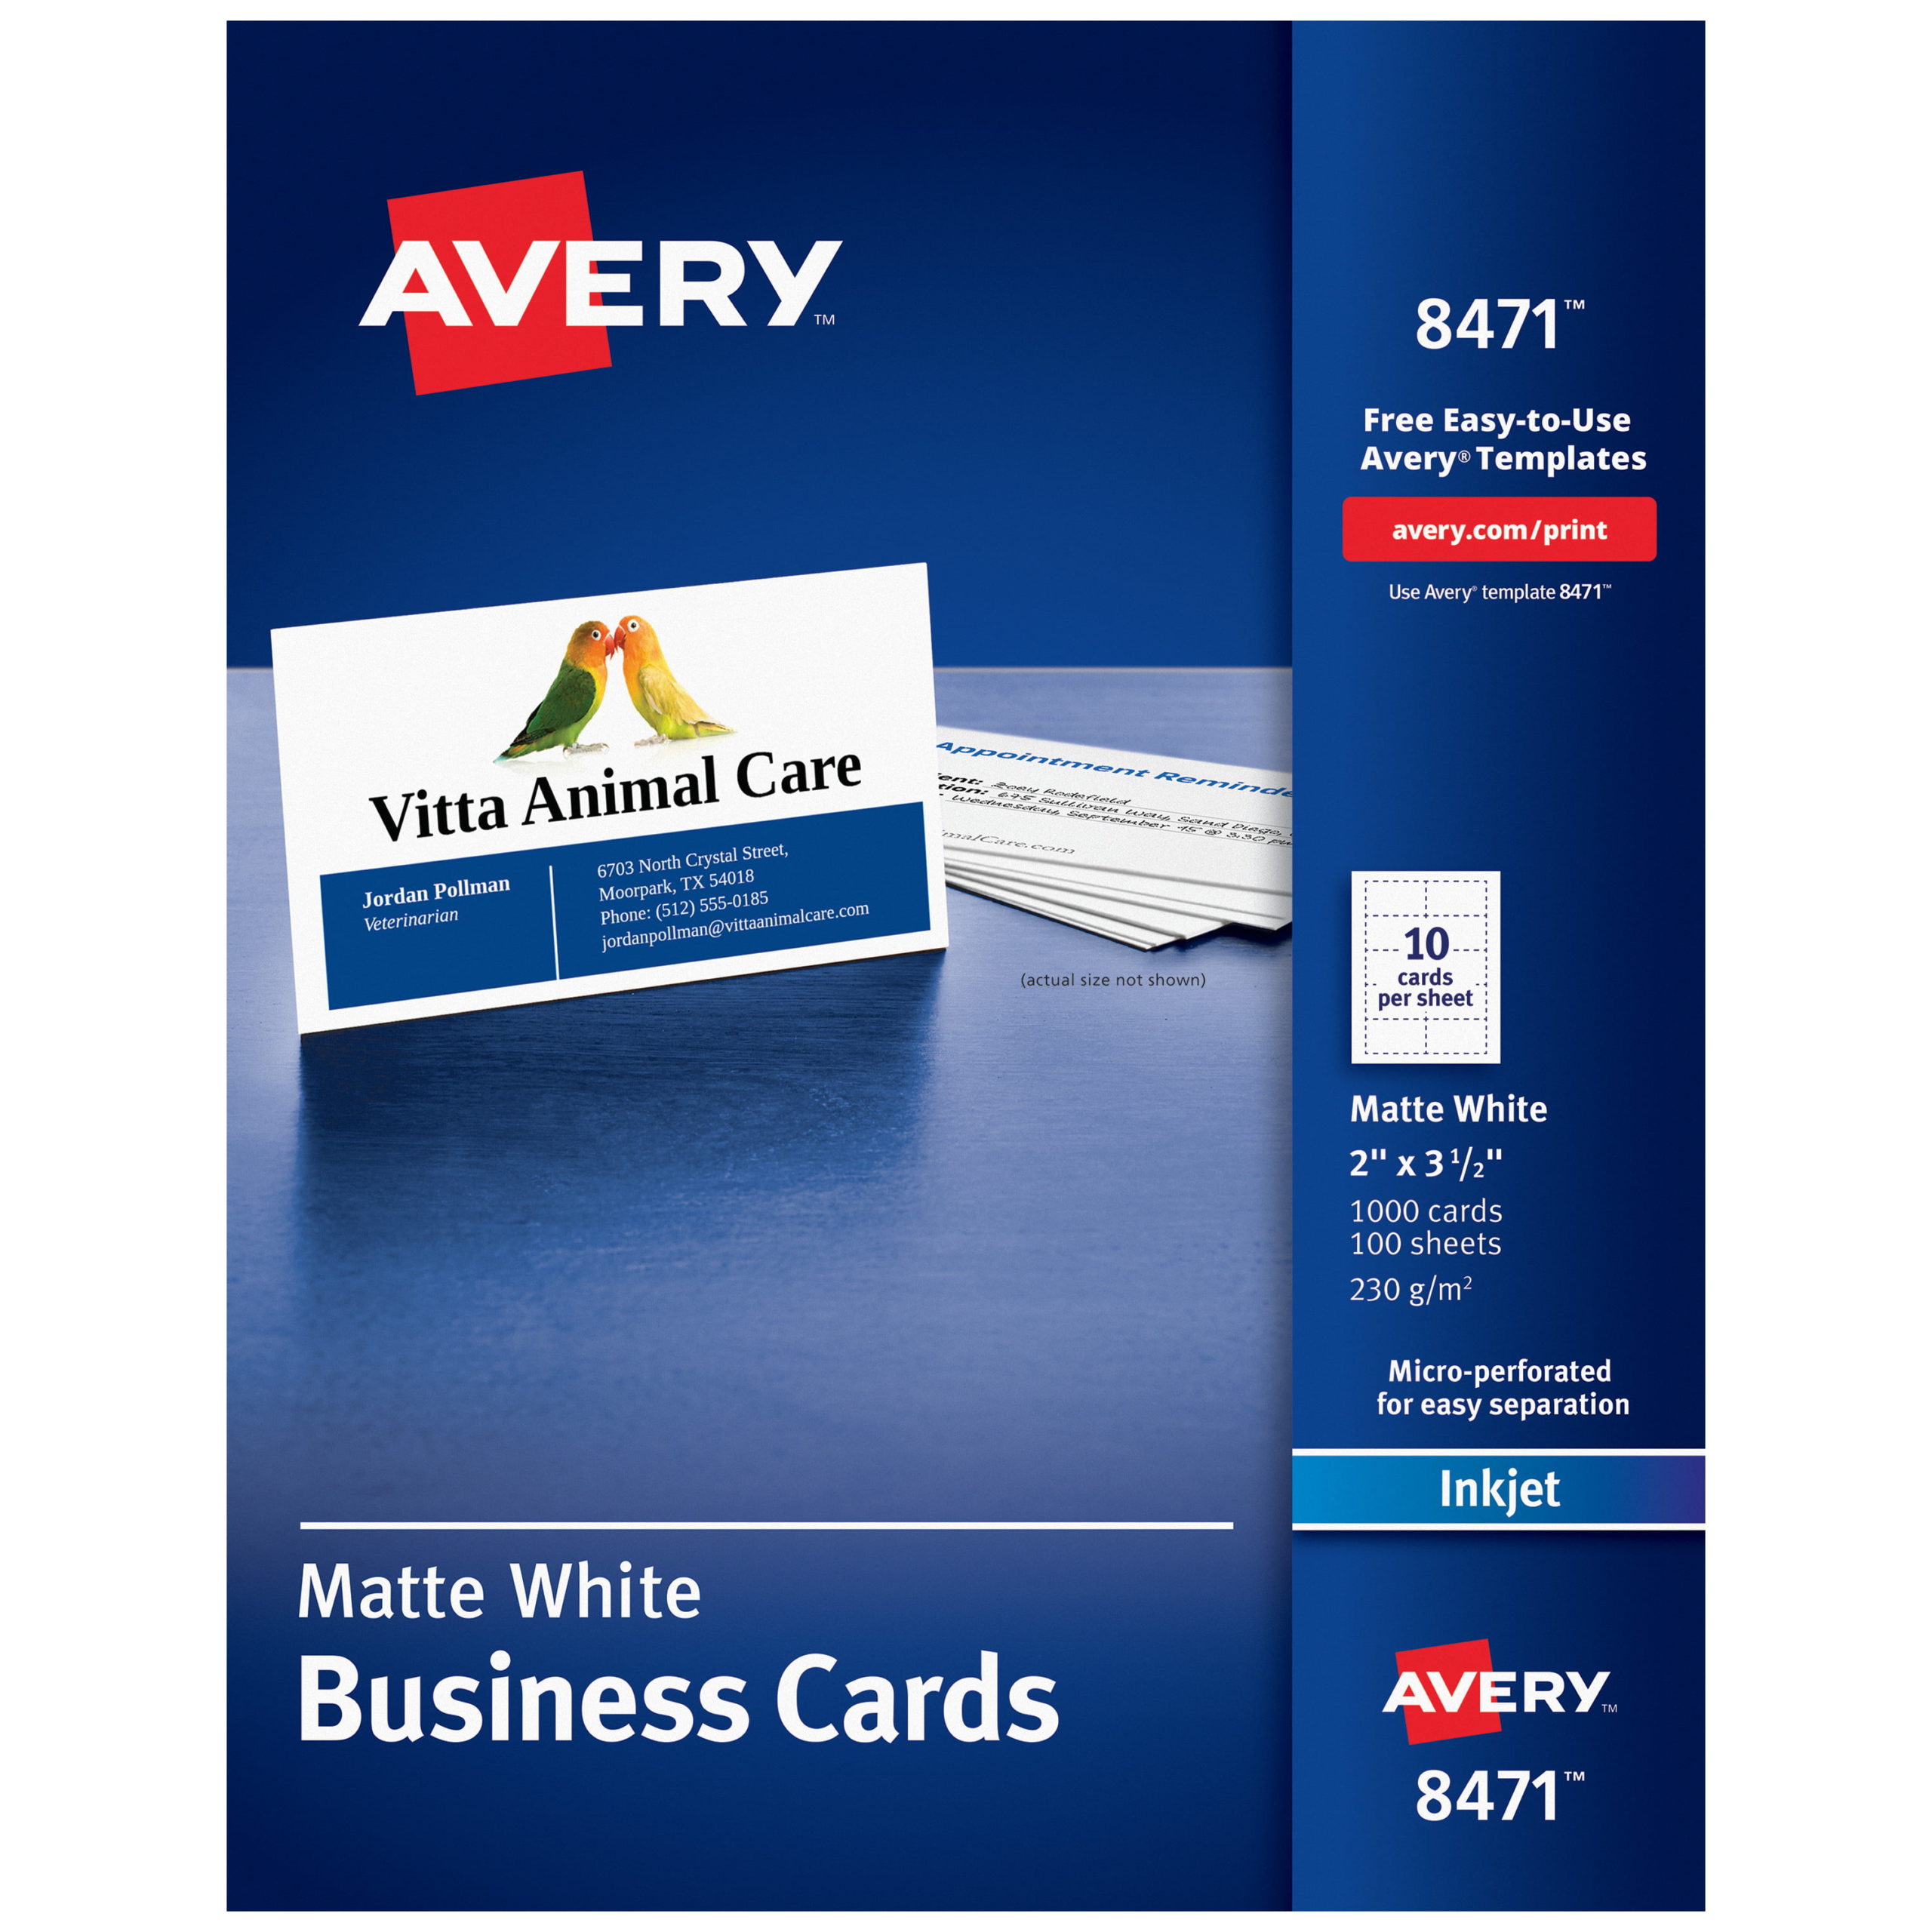 avery 5371 business cards wide template 1